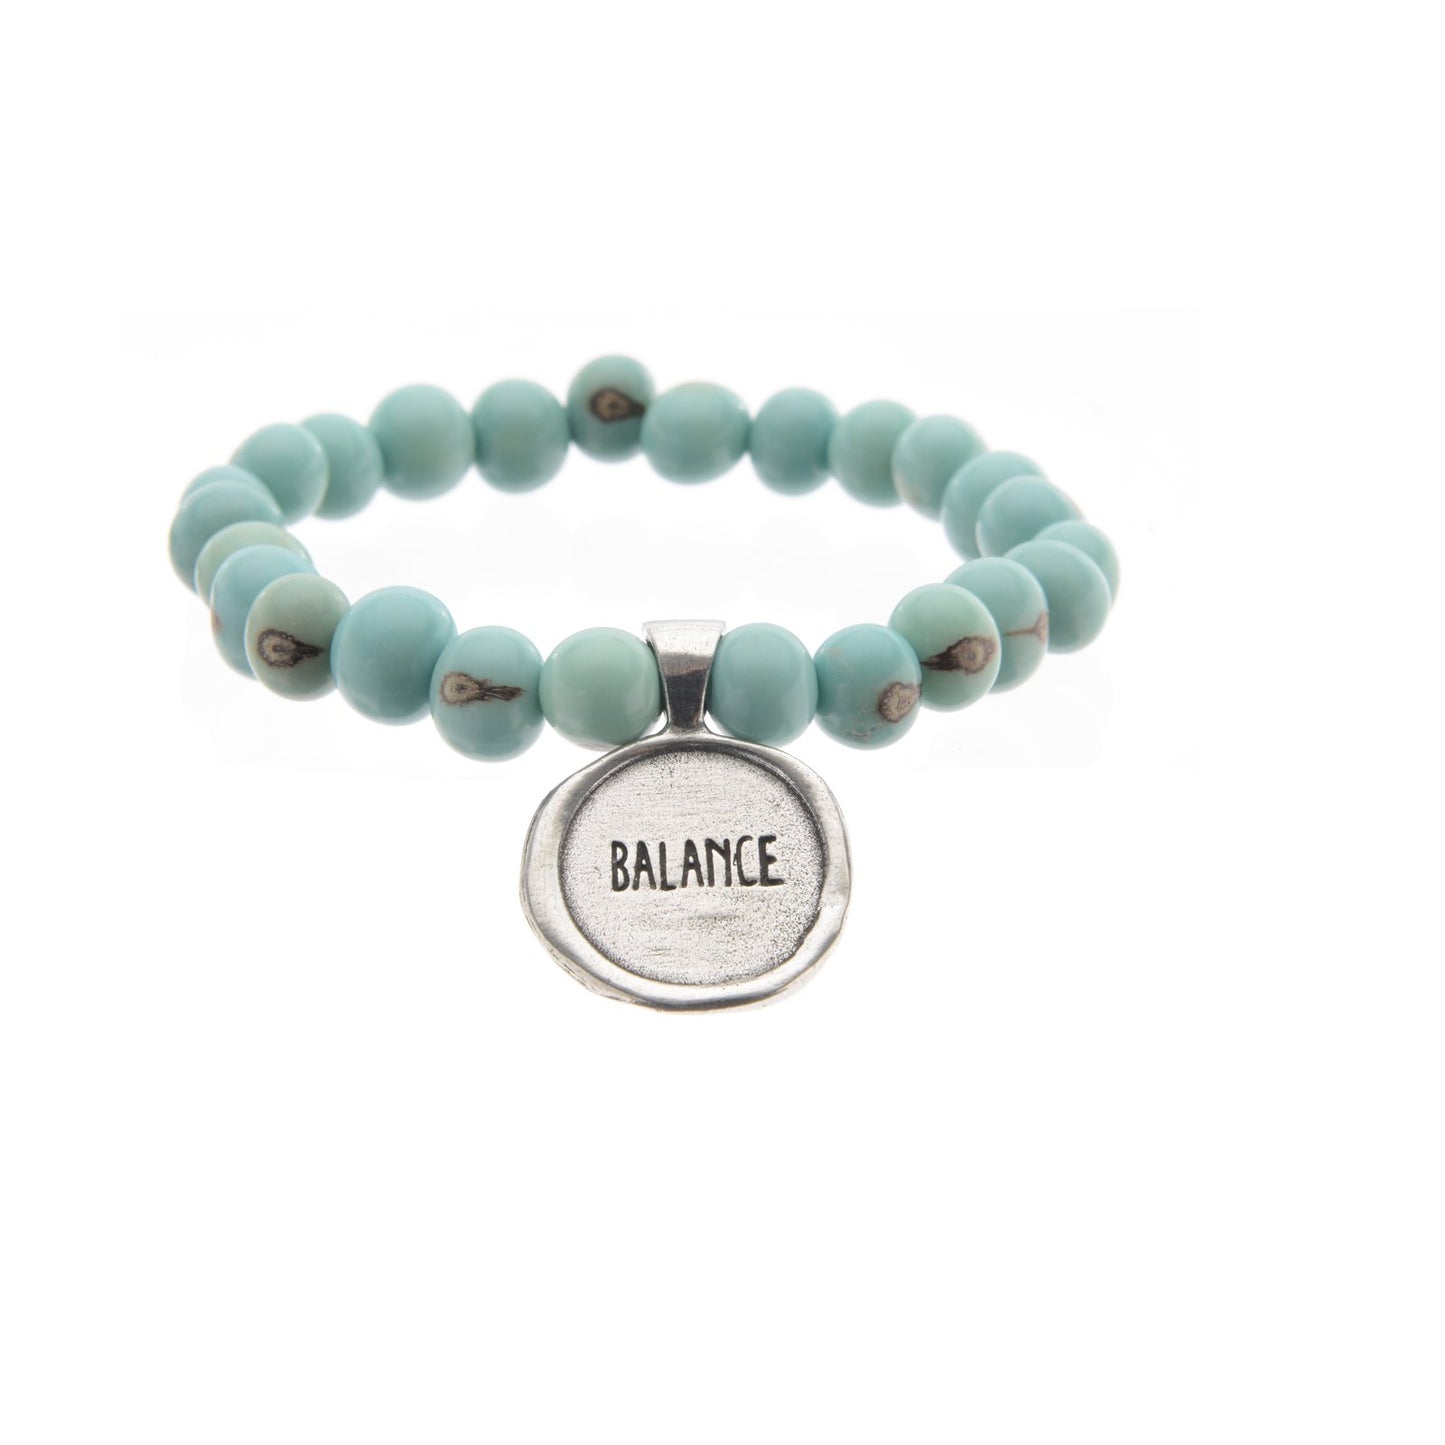 Acai Seeds Of Life Bracelet with Wax Seal - Baby Blue